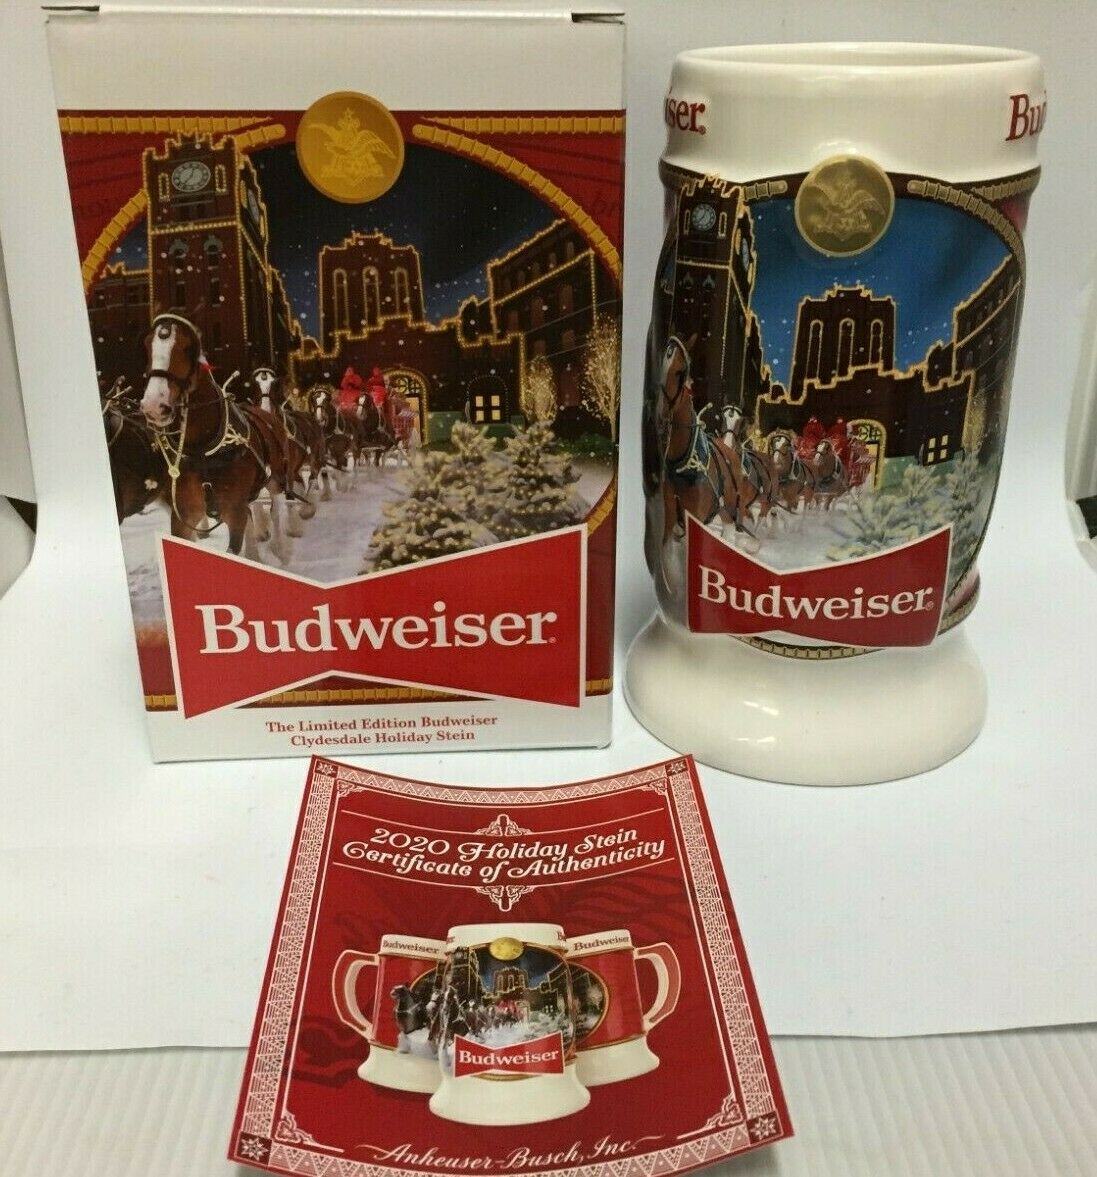 2020 Budweiser Holiday Stein Beer Mug From Annual Christmas Series Brand New!!